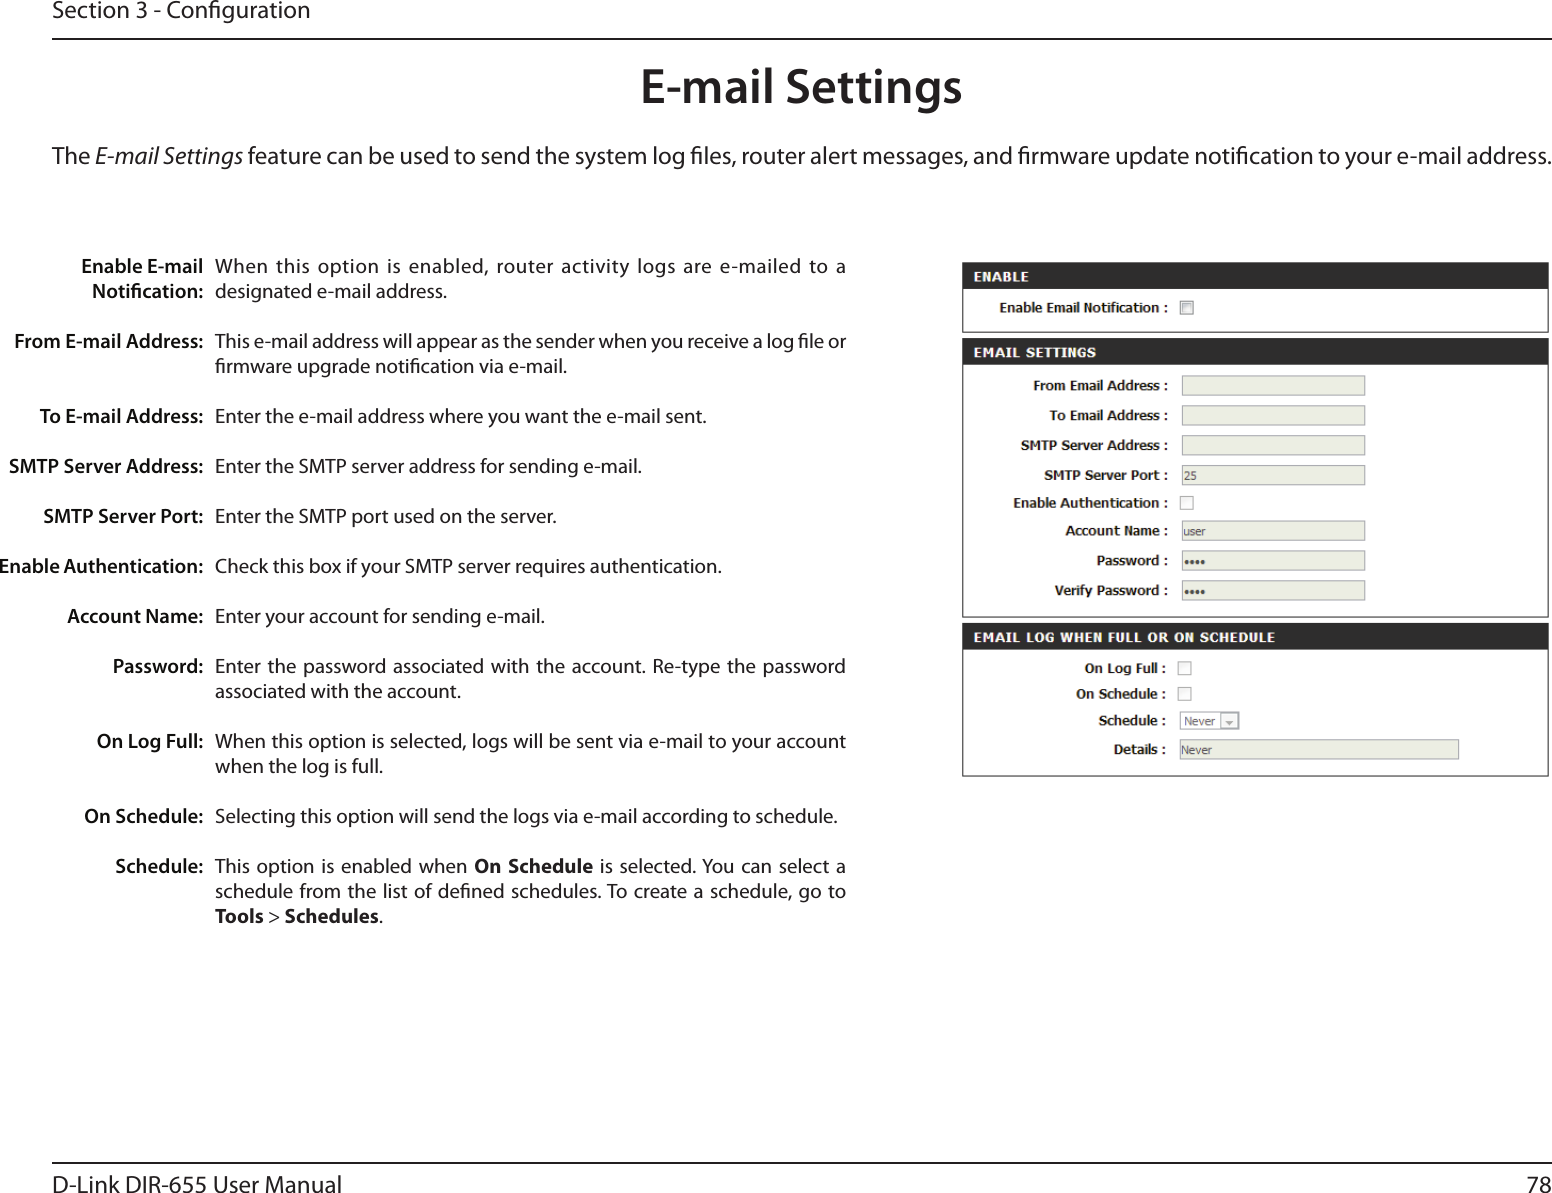 78D-Link DIR-655 User ManualSection 3 - CongurationE-mail SettingsThe E-mail Settings feature can be used to send the system log les, router alert messages, and rmware update notication to your e-mail address. Enable E-mail Notication: From E-mail Address:To E-mail Address:SMTP Server Address:SMTP Server Port:Enable Authentication:Account Name:Password:On Log Full:On Schedule:Schedule:When this  option is  enabled, router activity logs are e-mailed  to a designated e-mail address.This e-mail address will appear as the sender when you receive a log le or rmware upgrade notication via e-mail.Enter the e-mail address where you want the e-mail sent. Enter the SMTP server address for sending e-mail. Enter the SMTP port used on the server.Check this box if your SMTP server requires authentication. Enter your account for sending e-mail.Enter the  password associated with  the account. Re-type the  password associated with the account.When this option is selected, logs will be sent via e-mail to your account when the log is full.Selecting this option will send the logs via e-mail according to schedule.This option  is enabled  when  On Schedule is  selected. You can select a schedule from the list of dened schedules. To create a schedule, go to Tools &gt; Schedules.